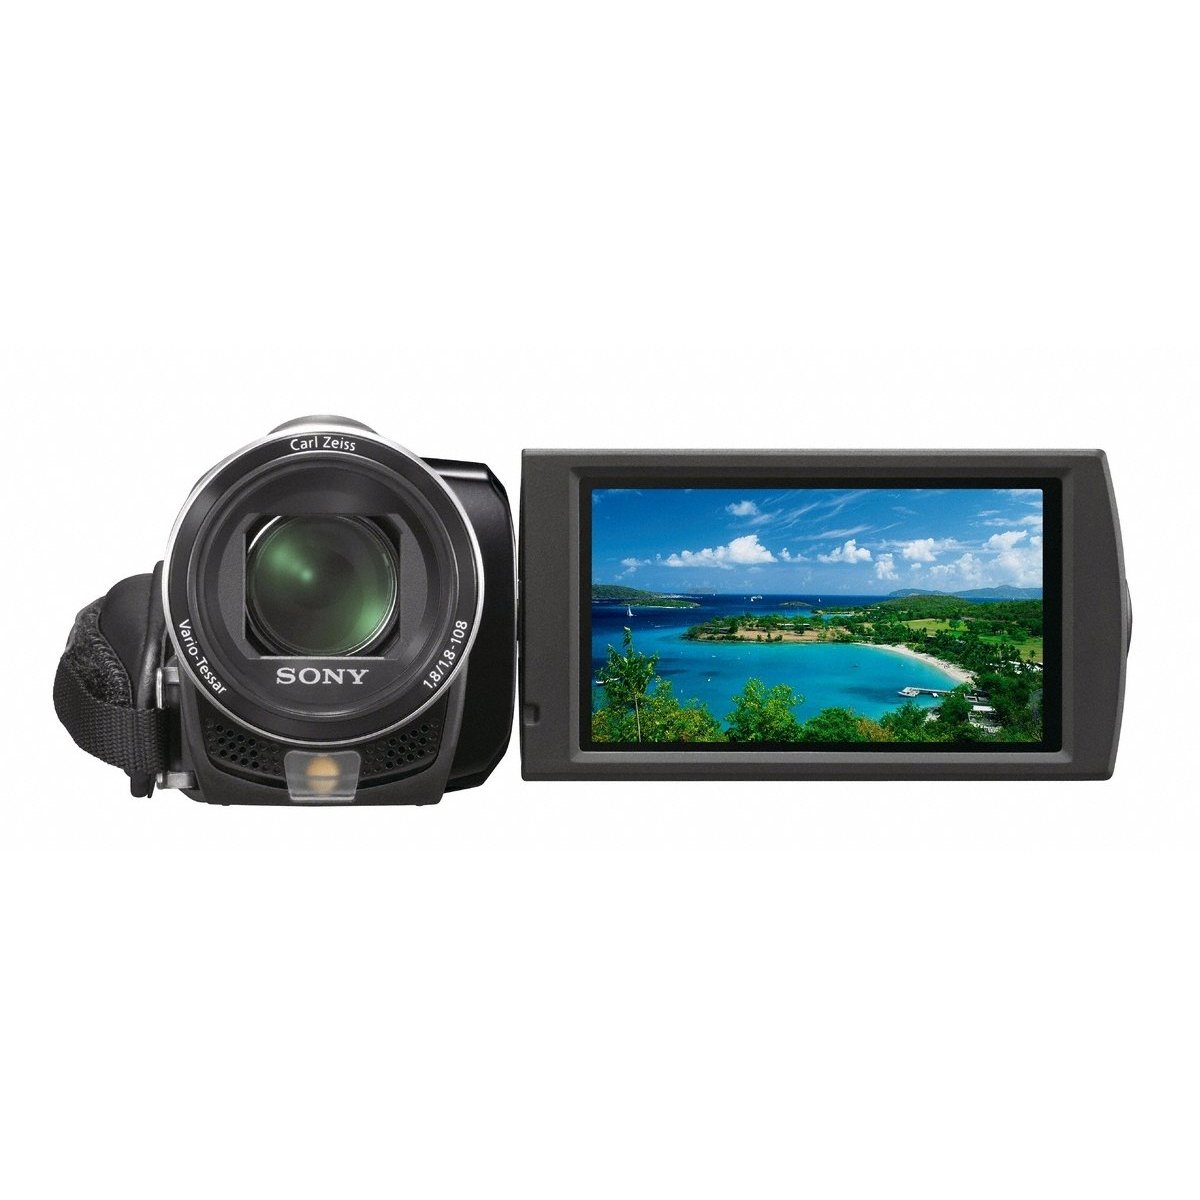 http://thetechjournal.com/wp-content/uploads/images/1108/1314692838-sony-dcrsx45-handycam-camcorder--2.jpg